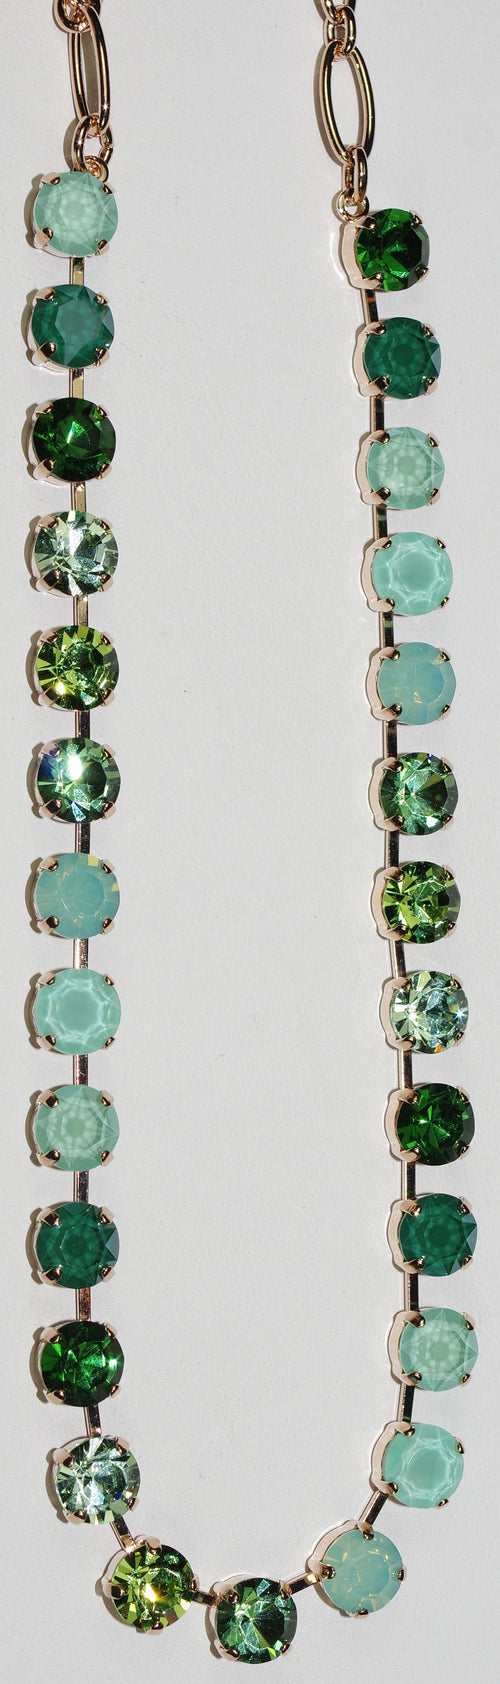 MARIANA NECKLACE BETTE FERN: pacific opal, green 1/4" stones in rose gold setting, 17" adjustable chain